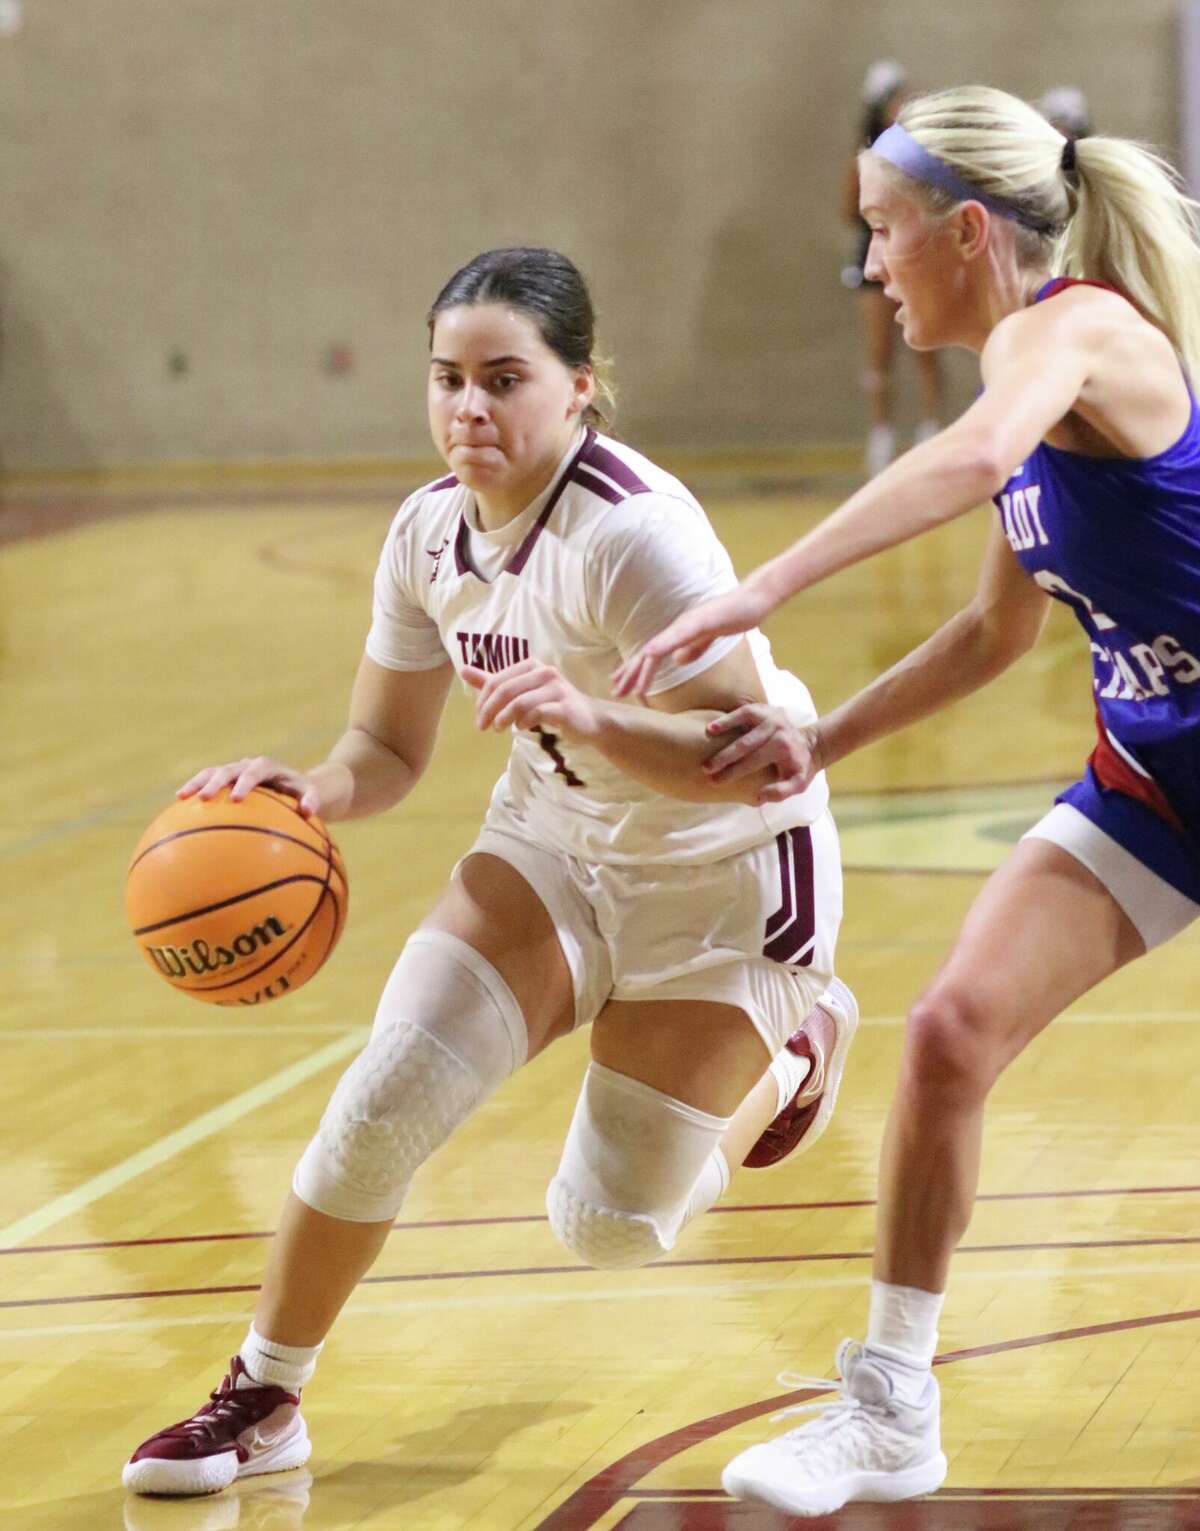 Evelyn Quiroz and the TAMIU women's basketball team will play two games in Puerto Rico on Wednesday and Thursday, respectively.